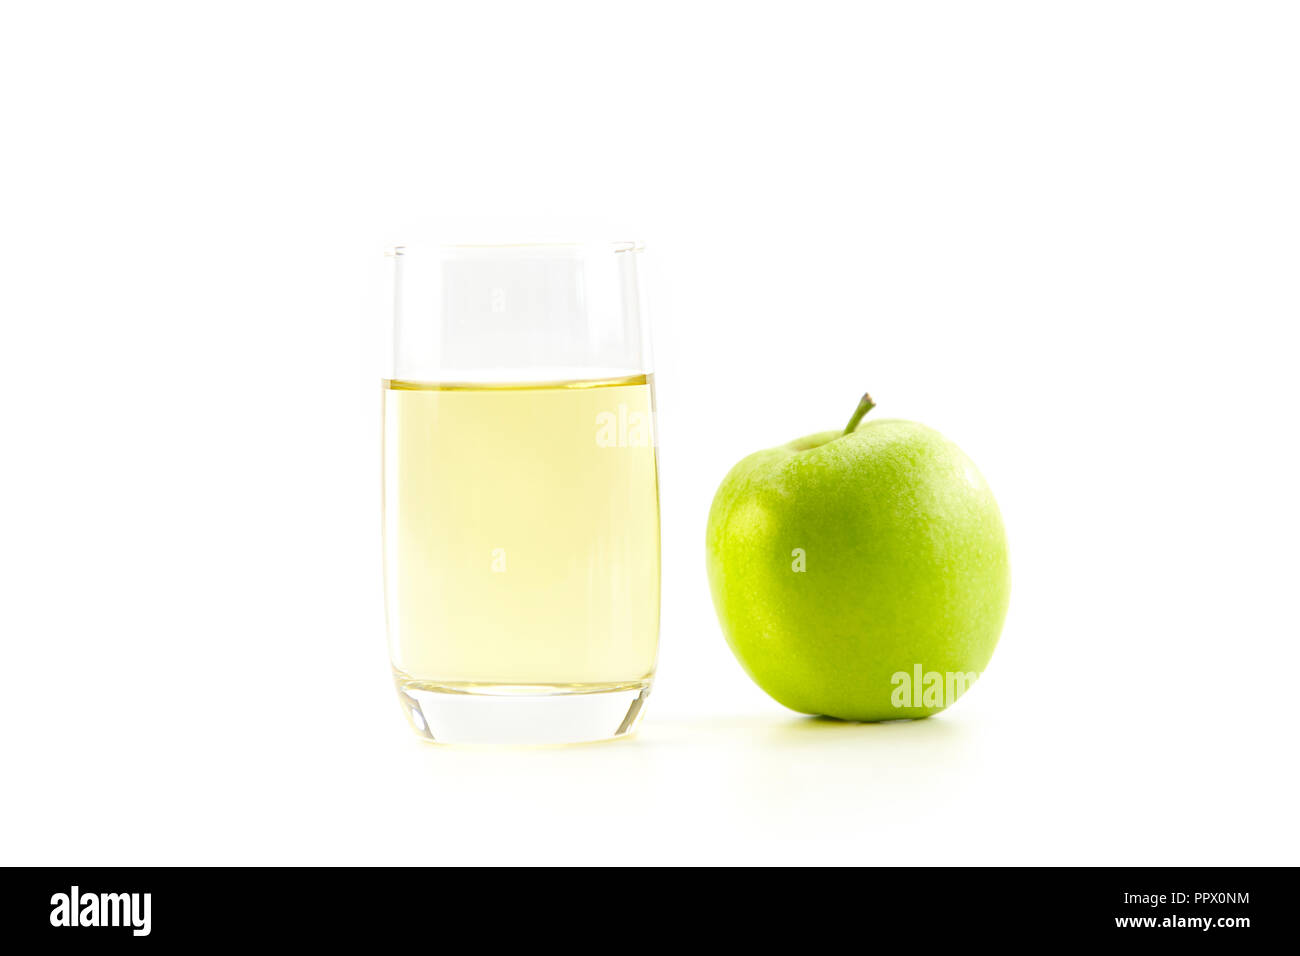 one green apple and a glass of apple juice isolated on white background. Stock Photo